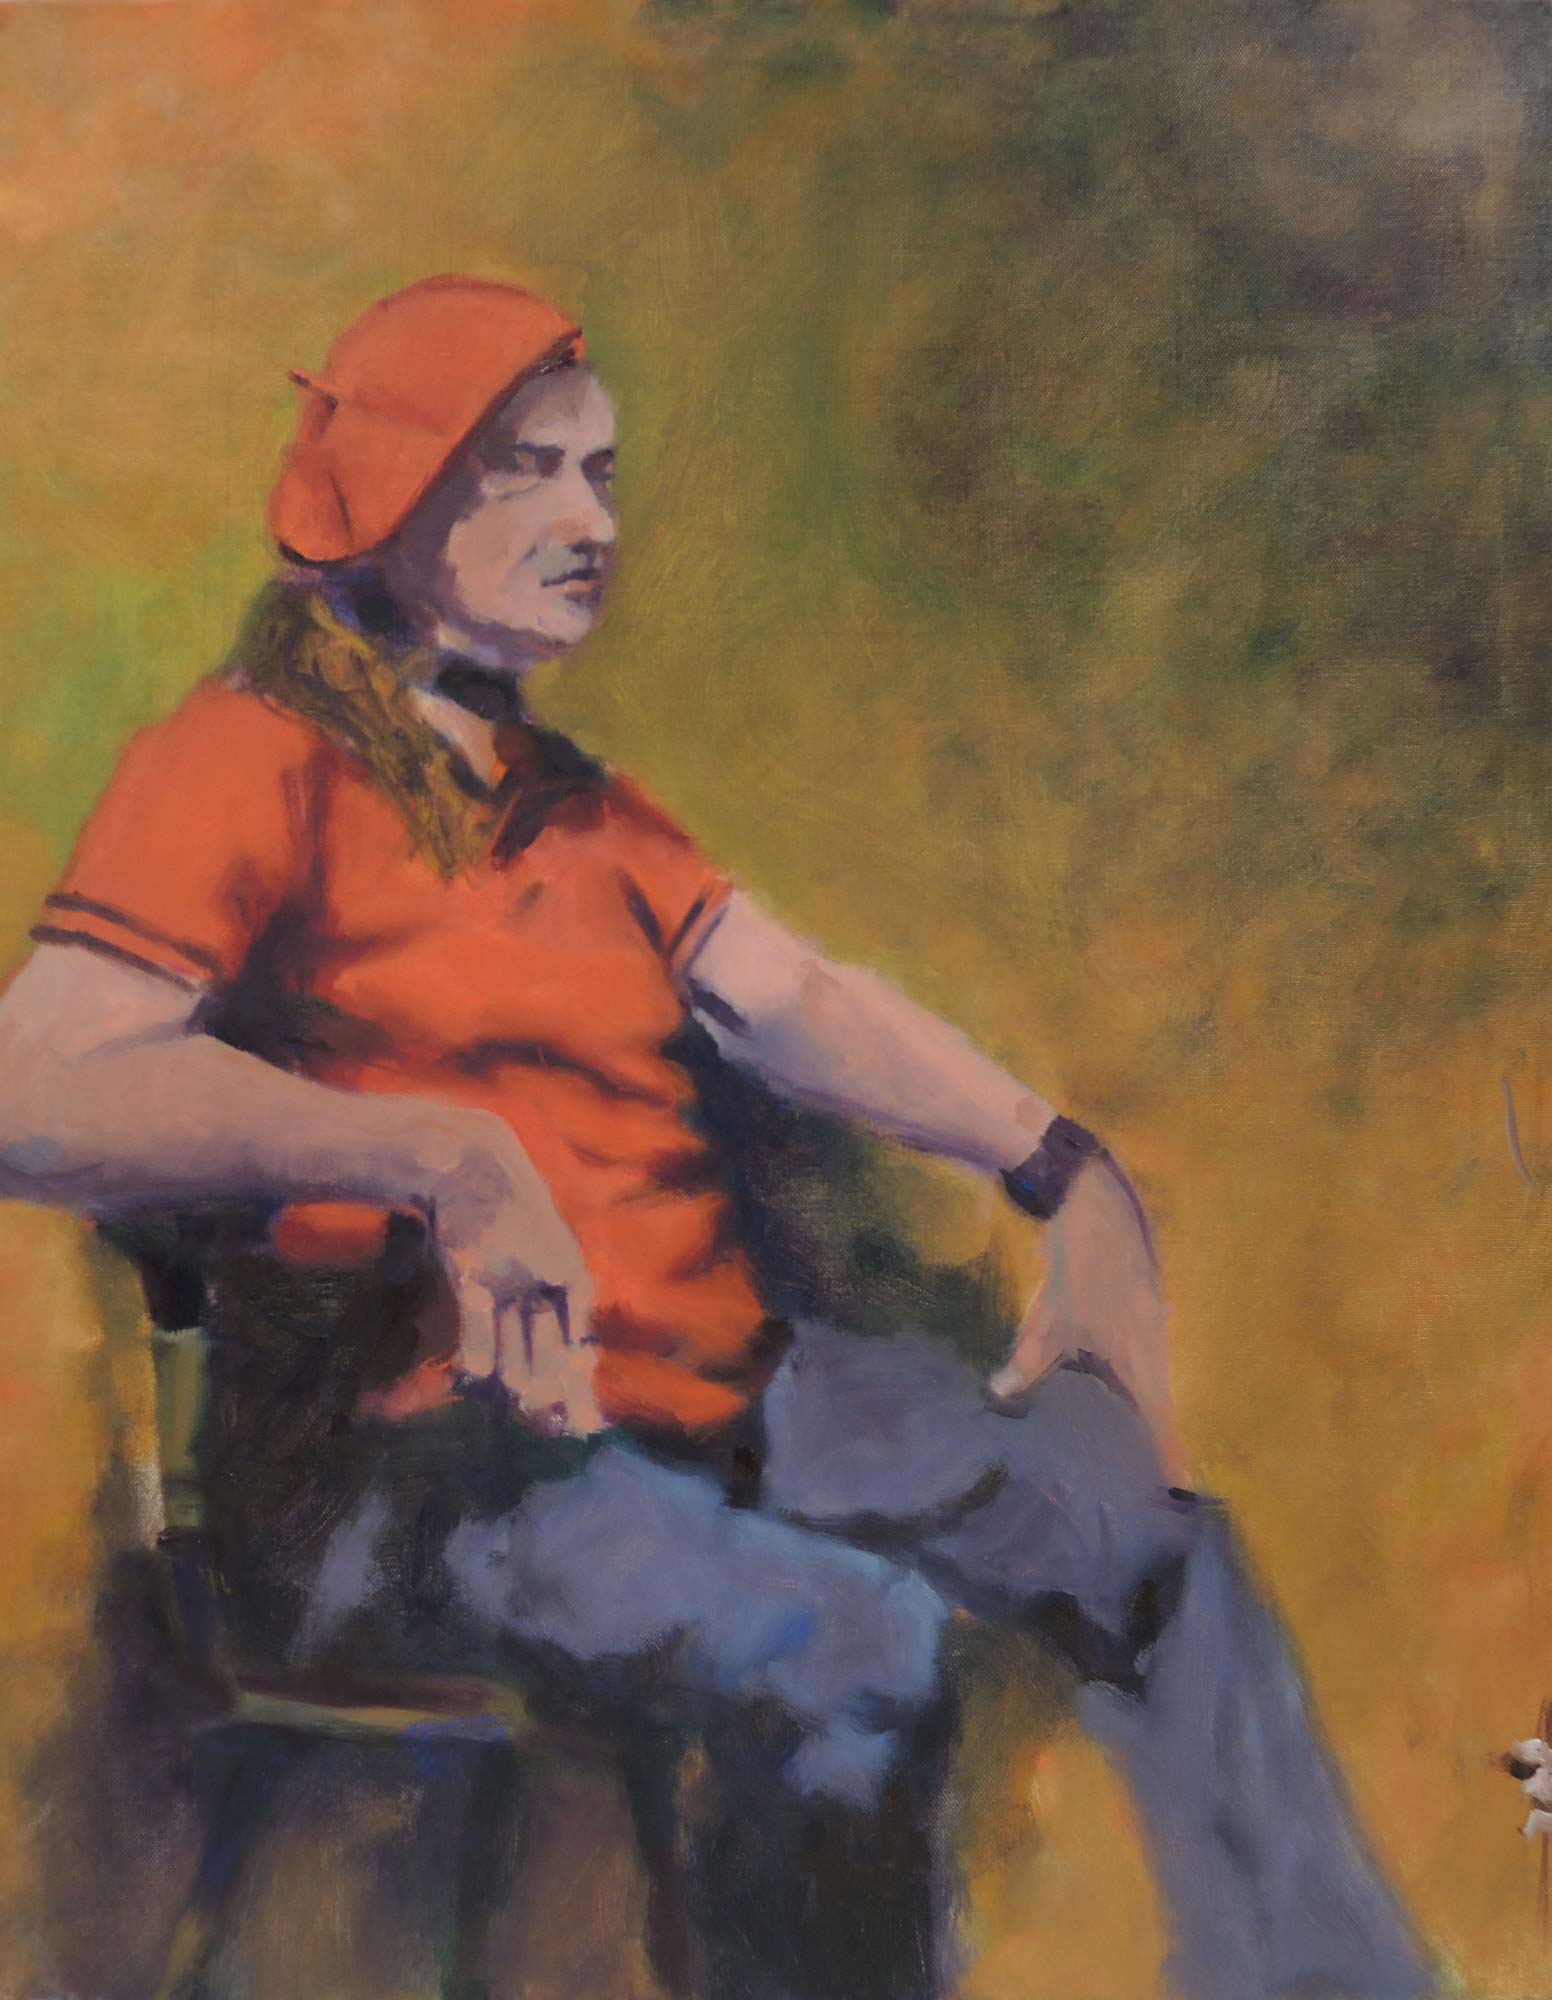 A painting by Robert Gomez of a seated figure in a red shirt and hat